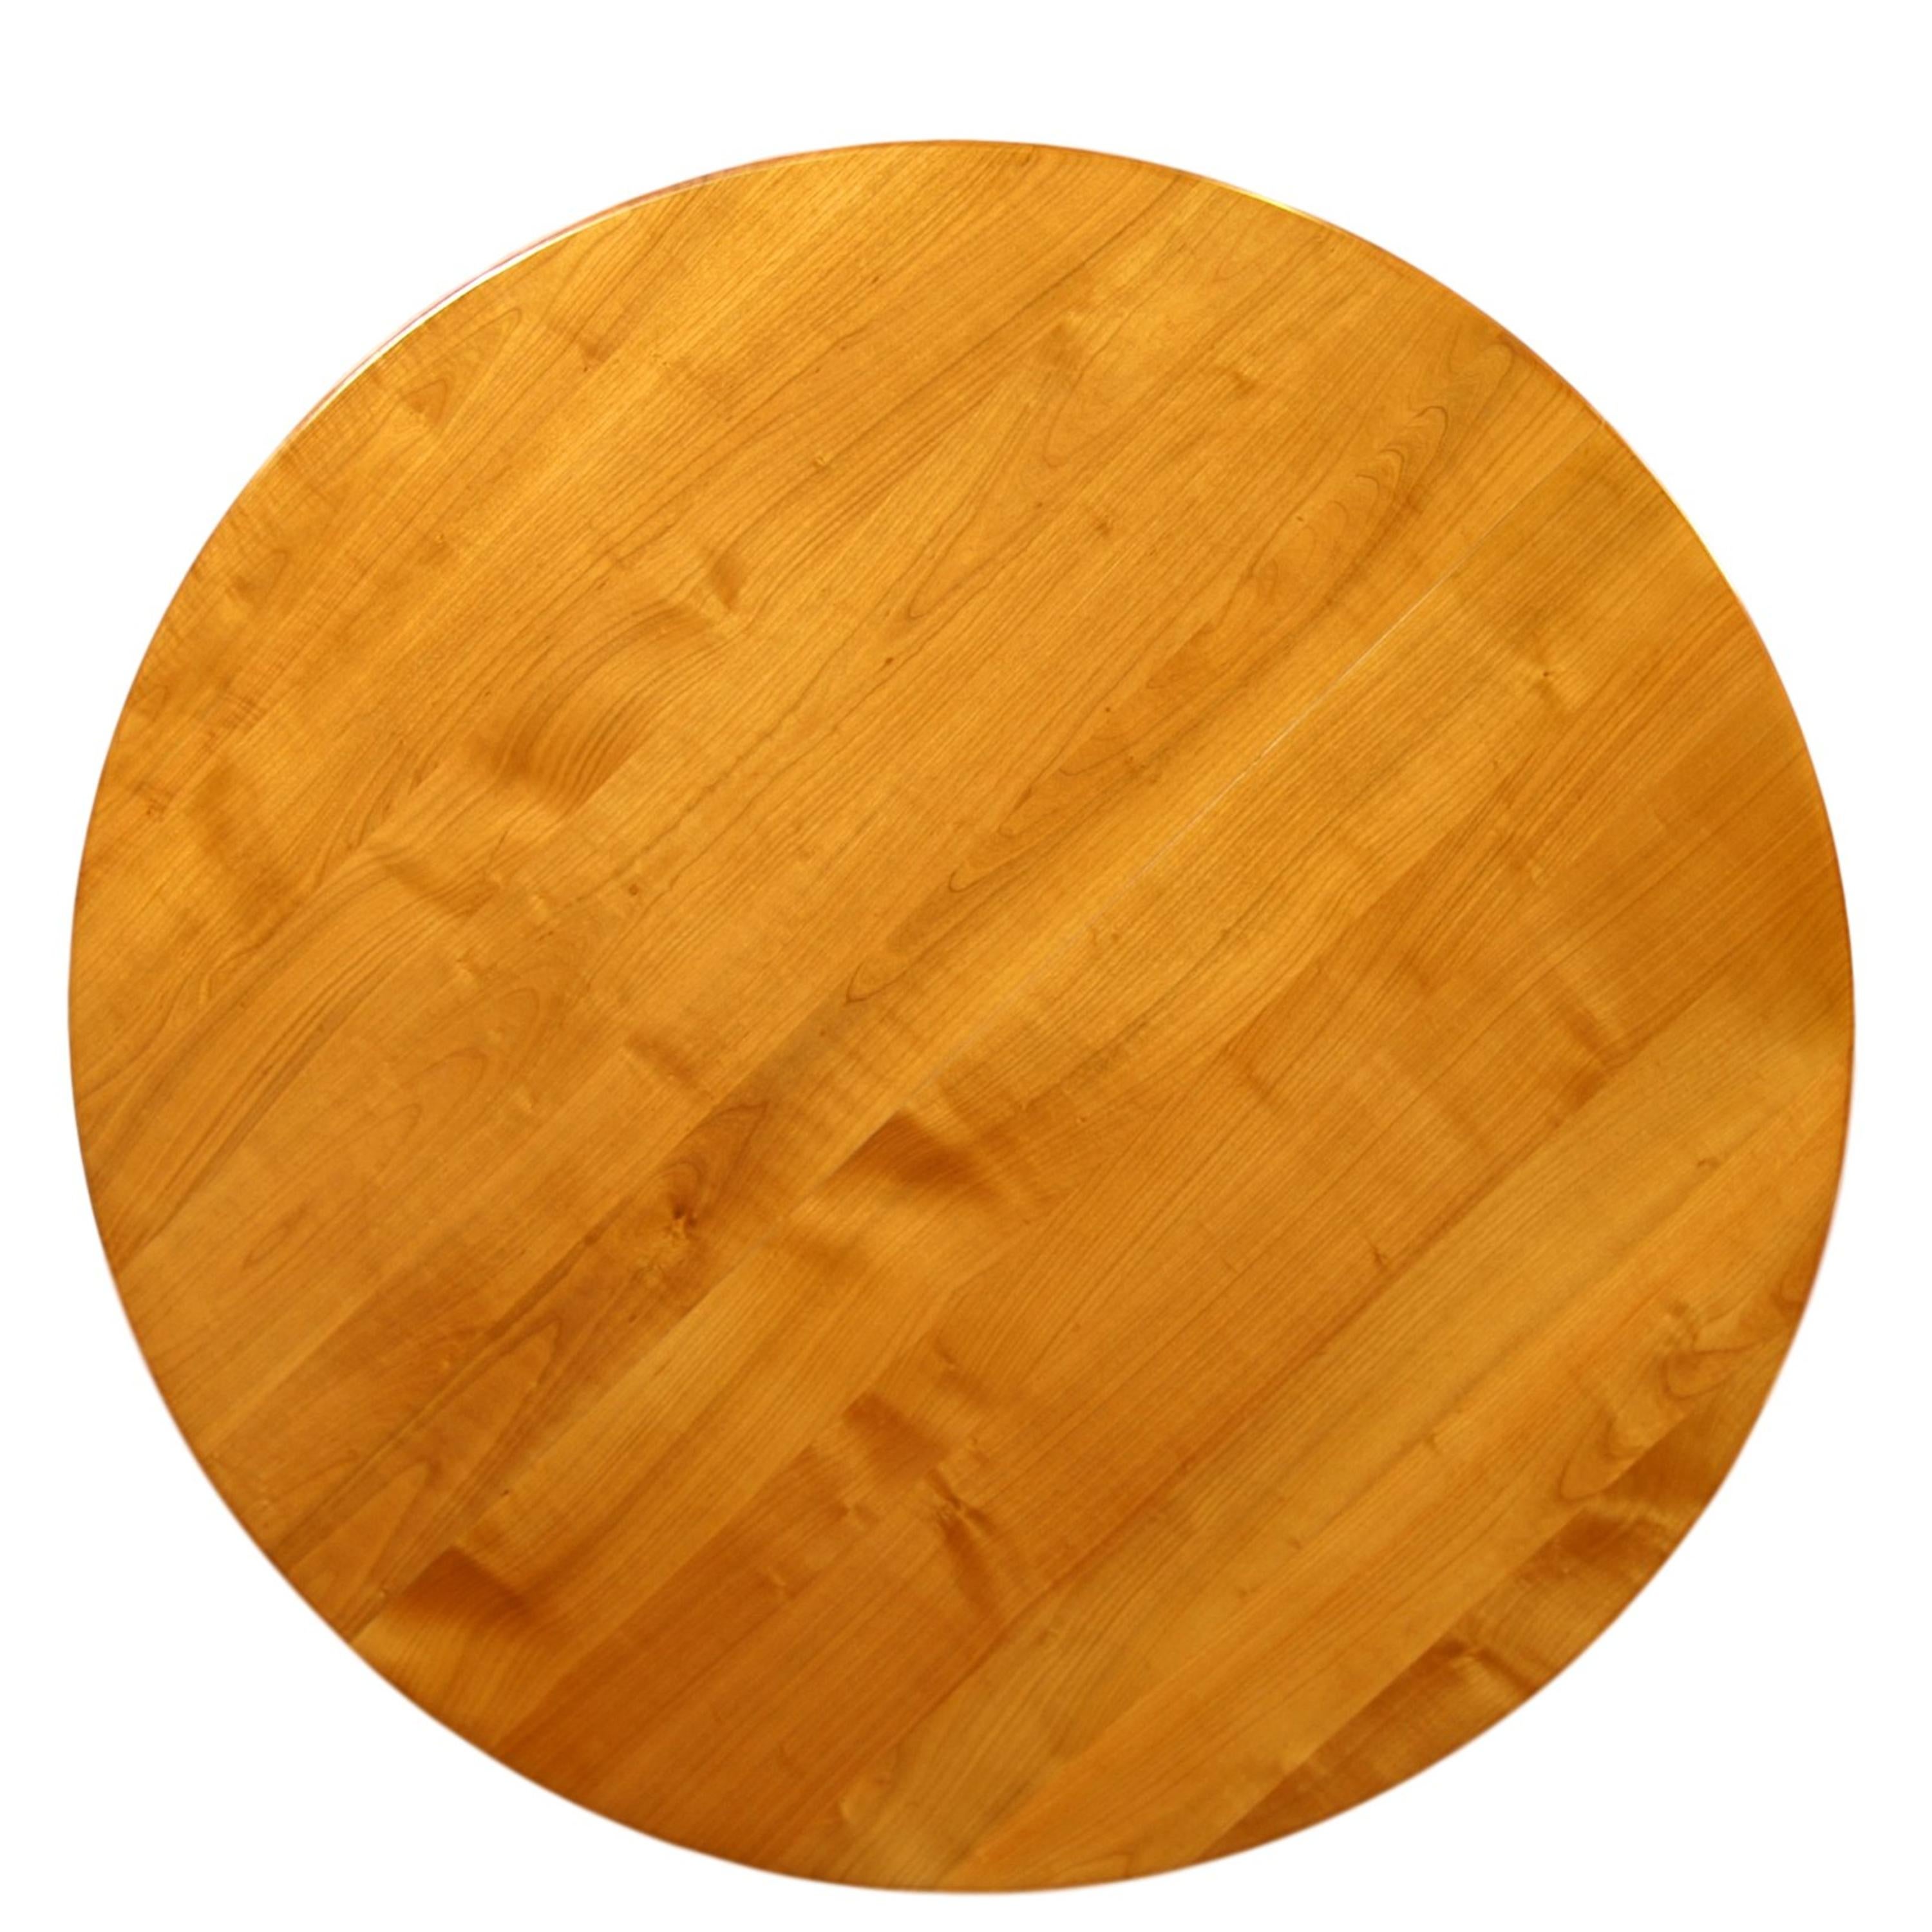 2 foot round table